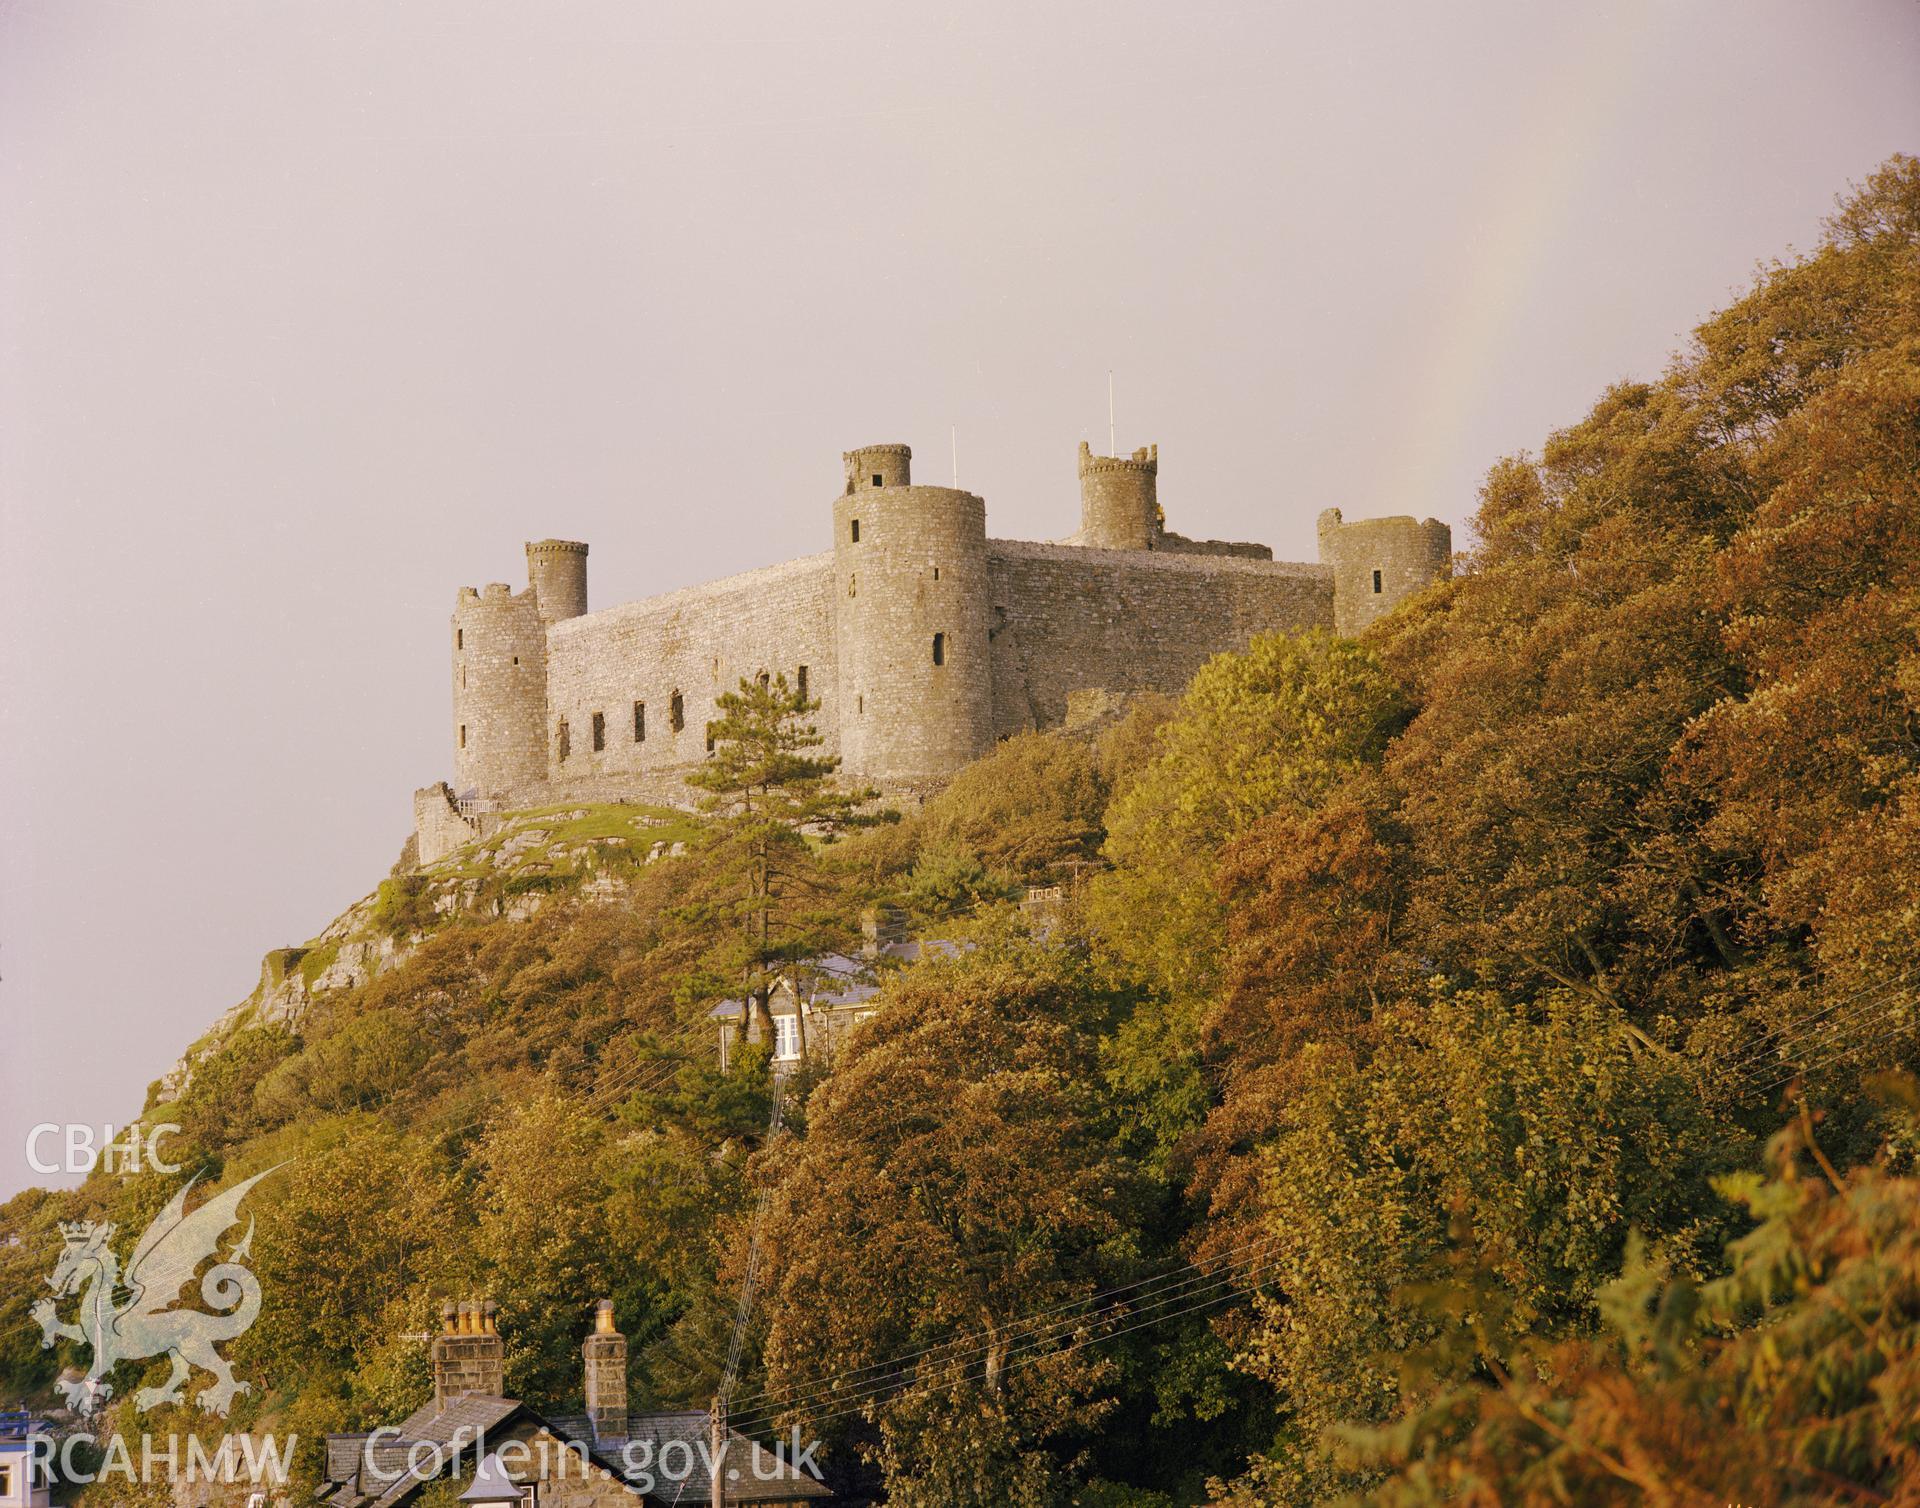 1 colour print showing view of Harlech castle, collated by the former Central Office of Information.